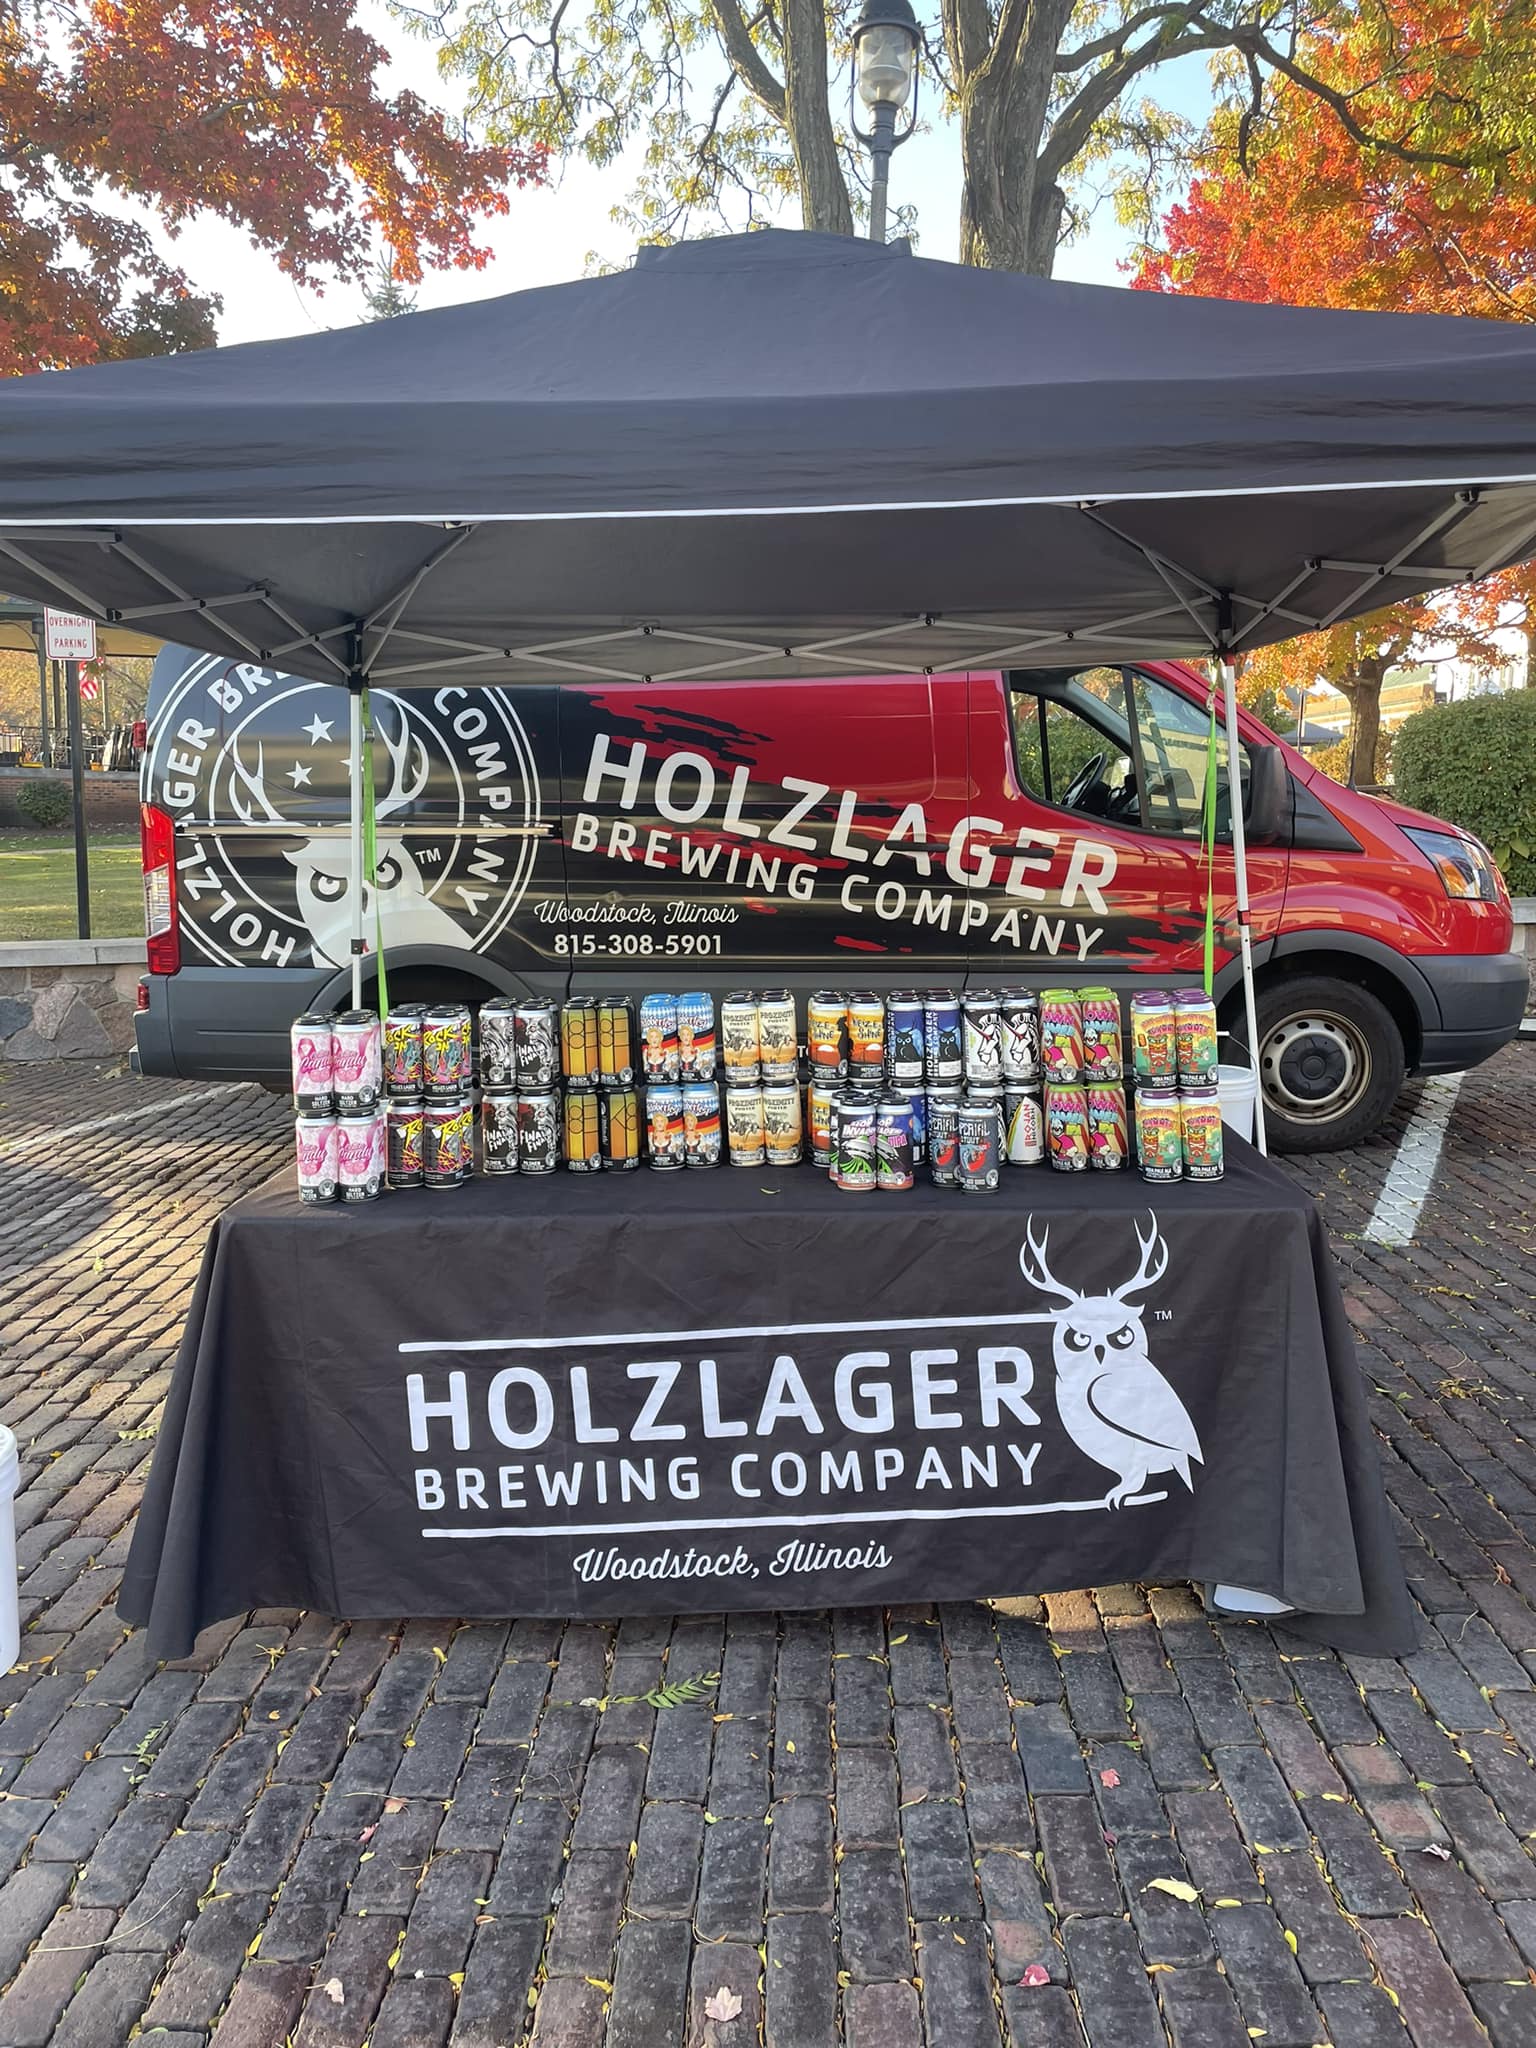 Makers Market – Sunday Funday – Live Music at Holzlager